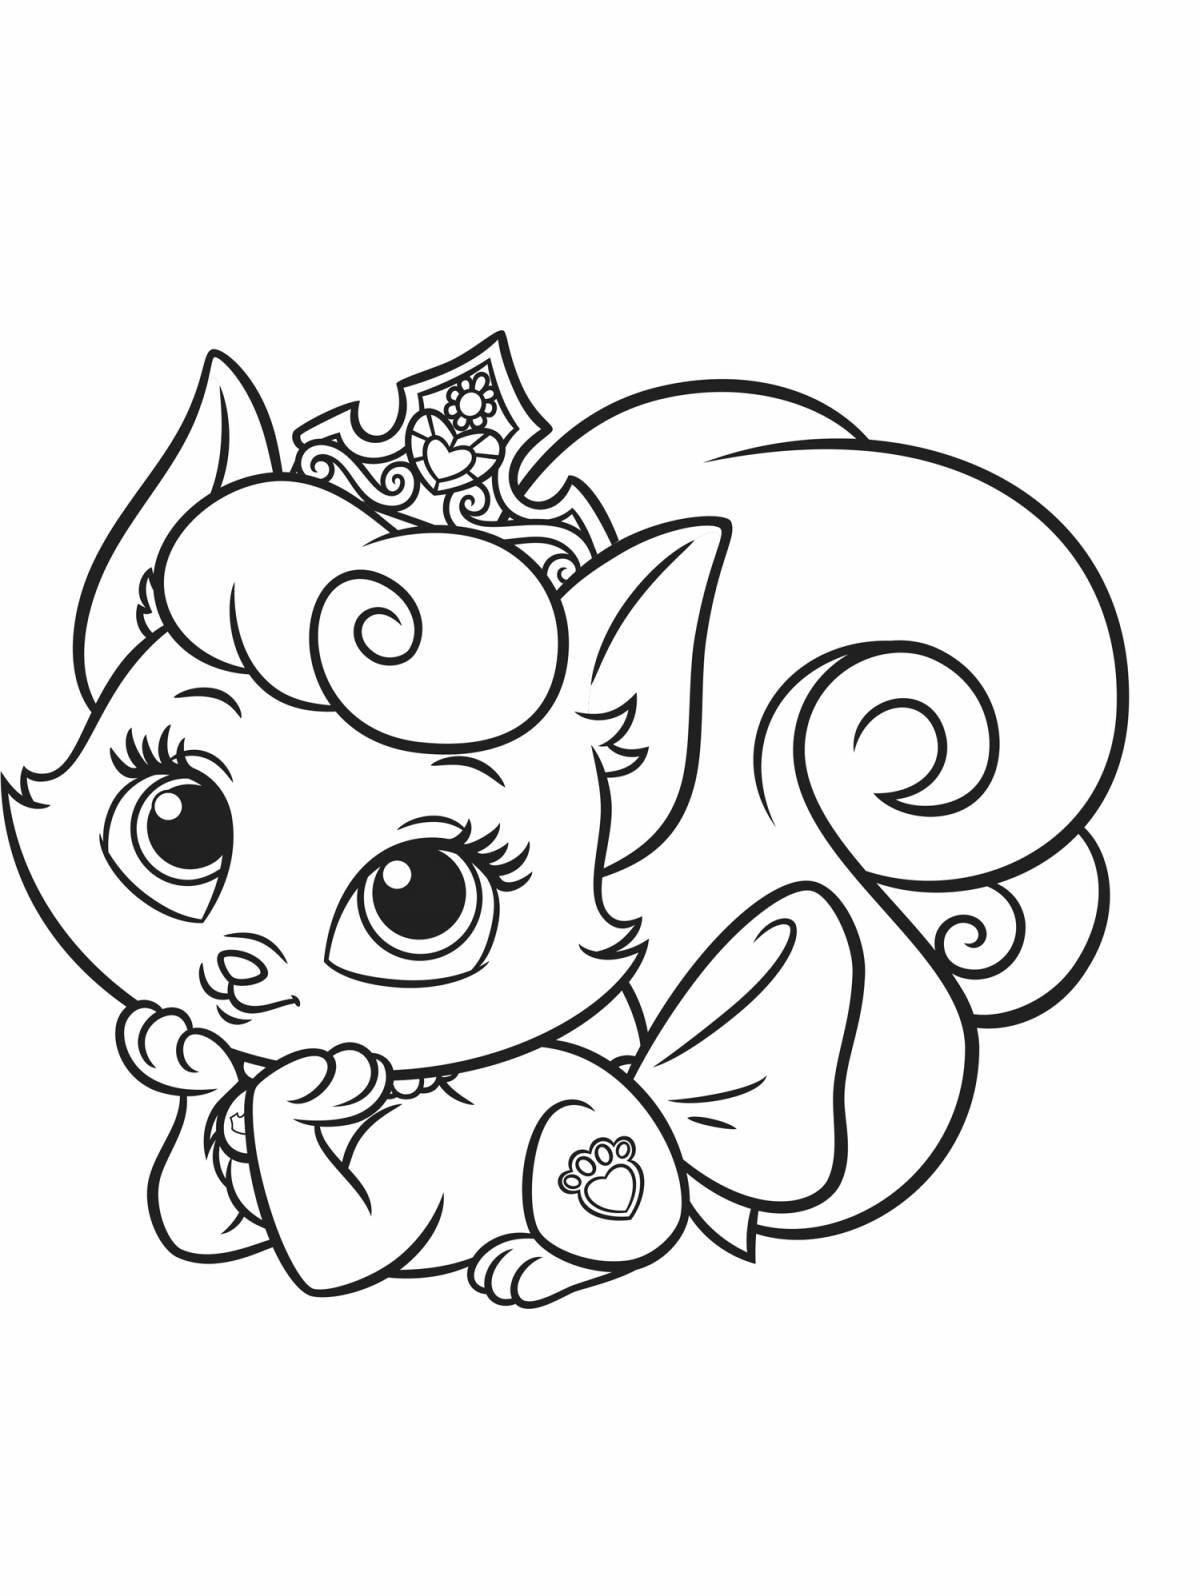 Curious cats coloring pages for girls